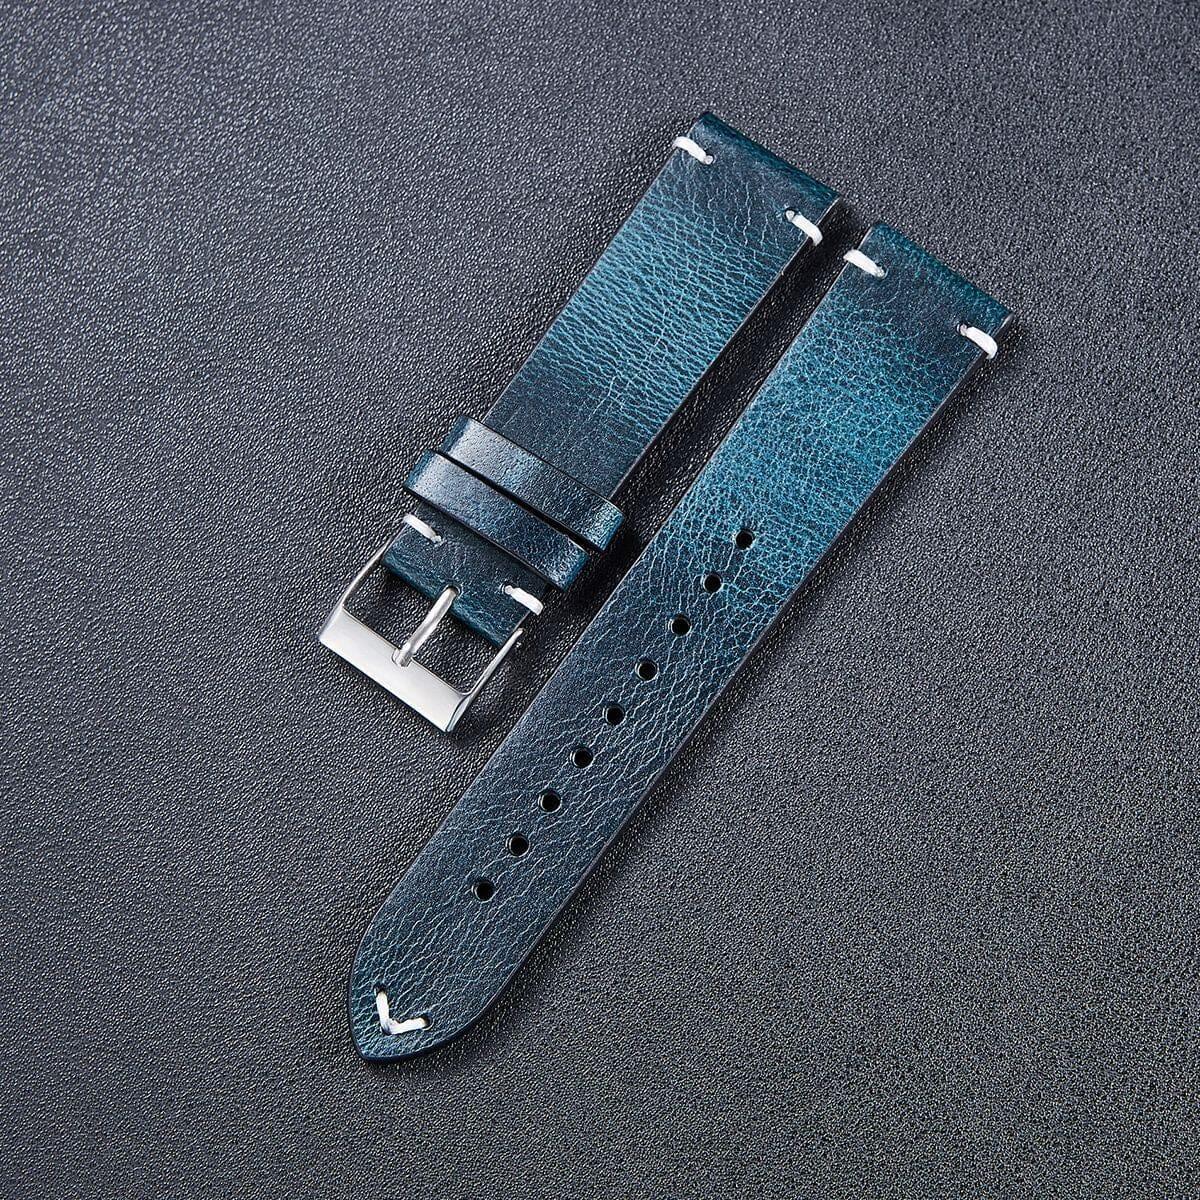 Vintage Oiled Leather Watch Straps Compatible with the Polar Vantage M